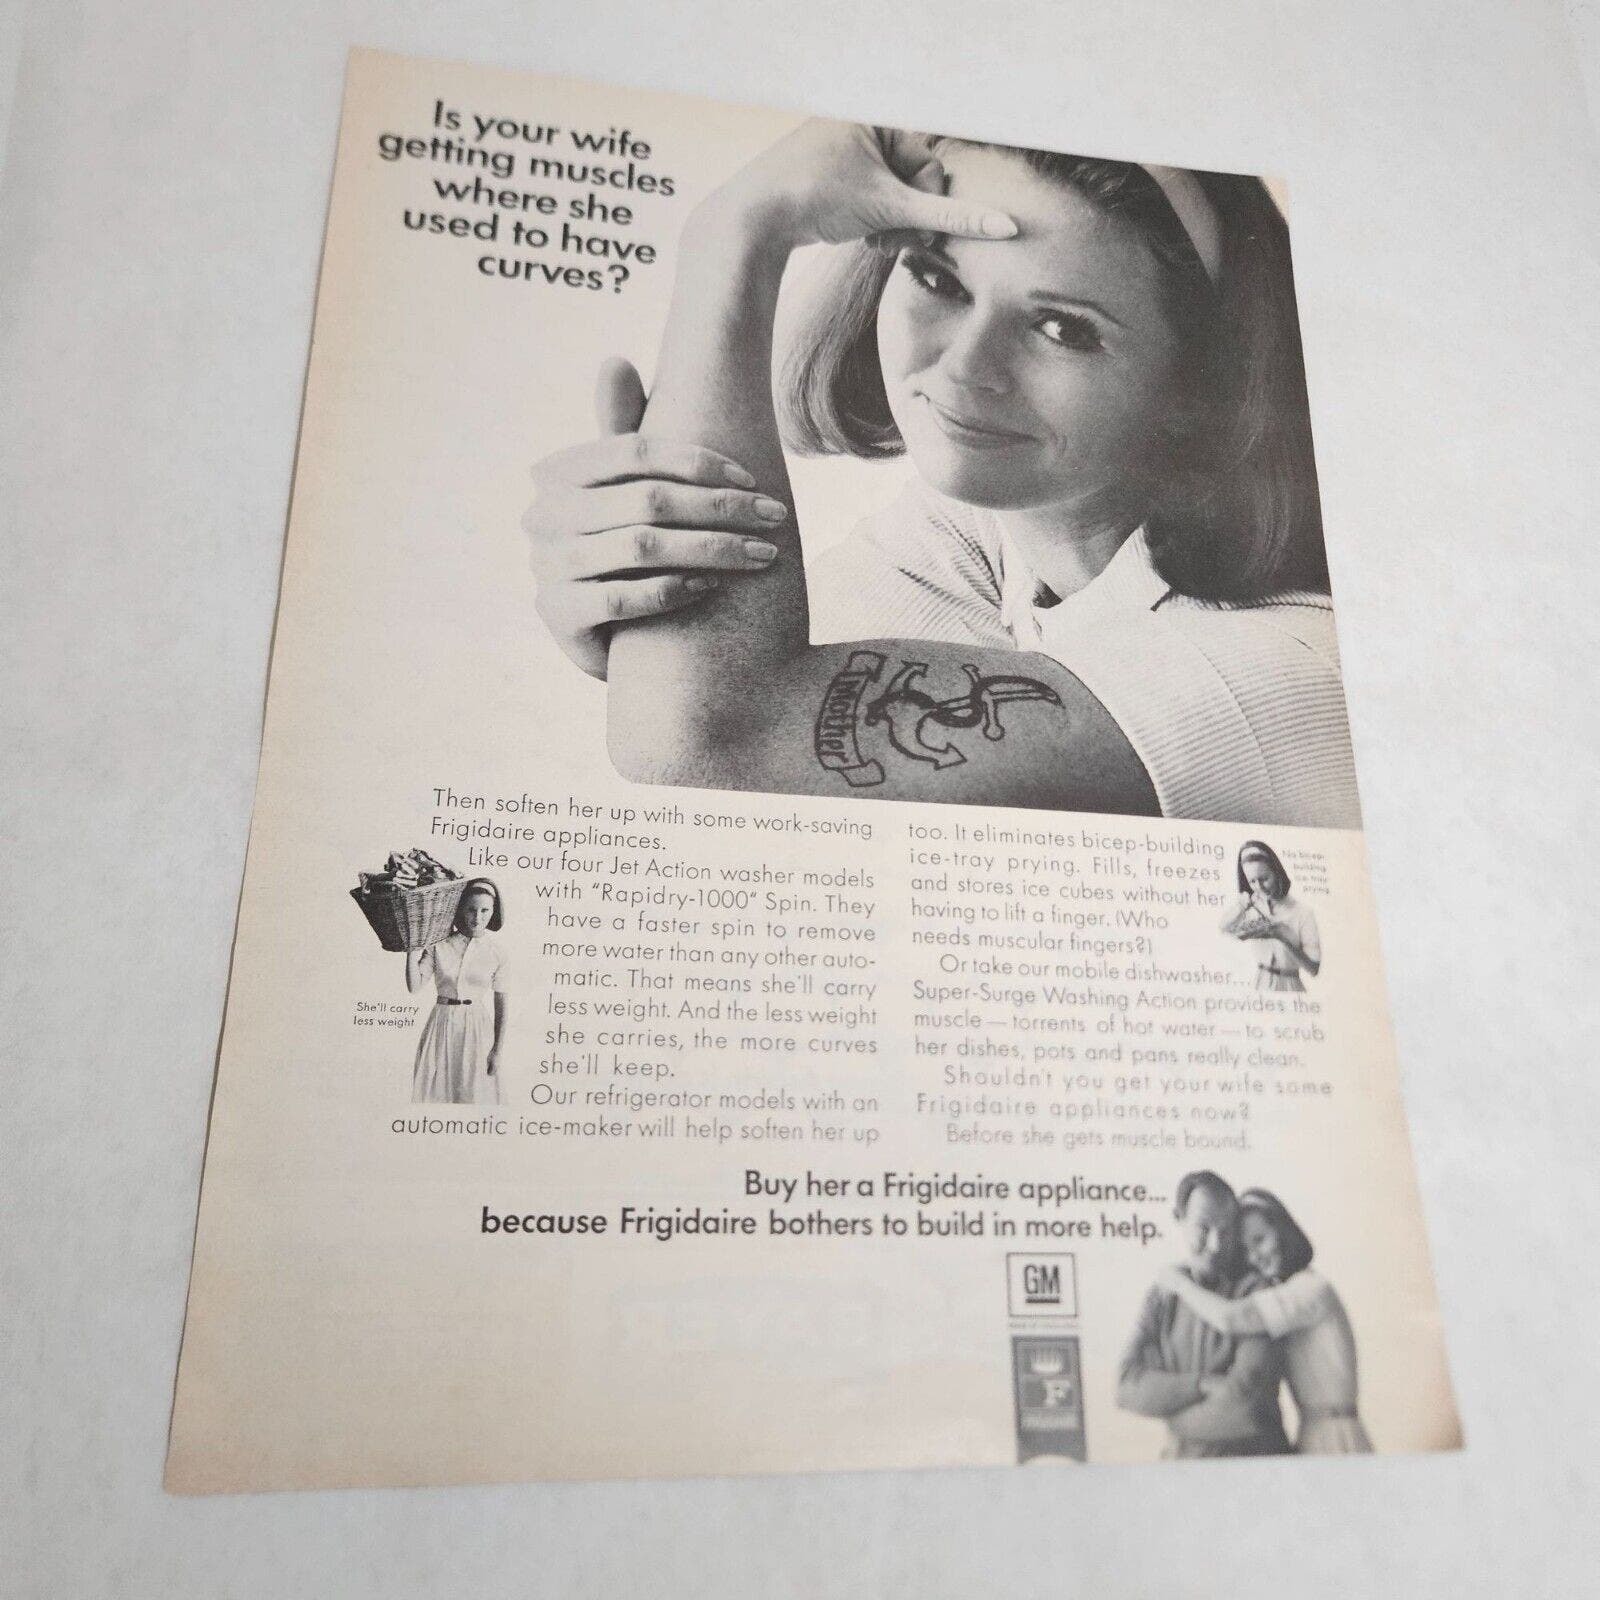 Frigidaire Appliance Wife Getting Muscles Used to Have Curves Vtg Print Ad 1967 - $10.98